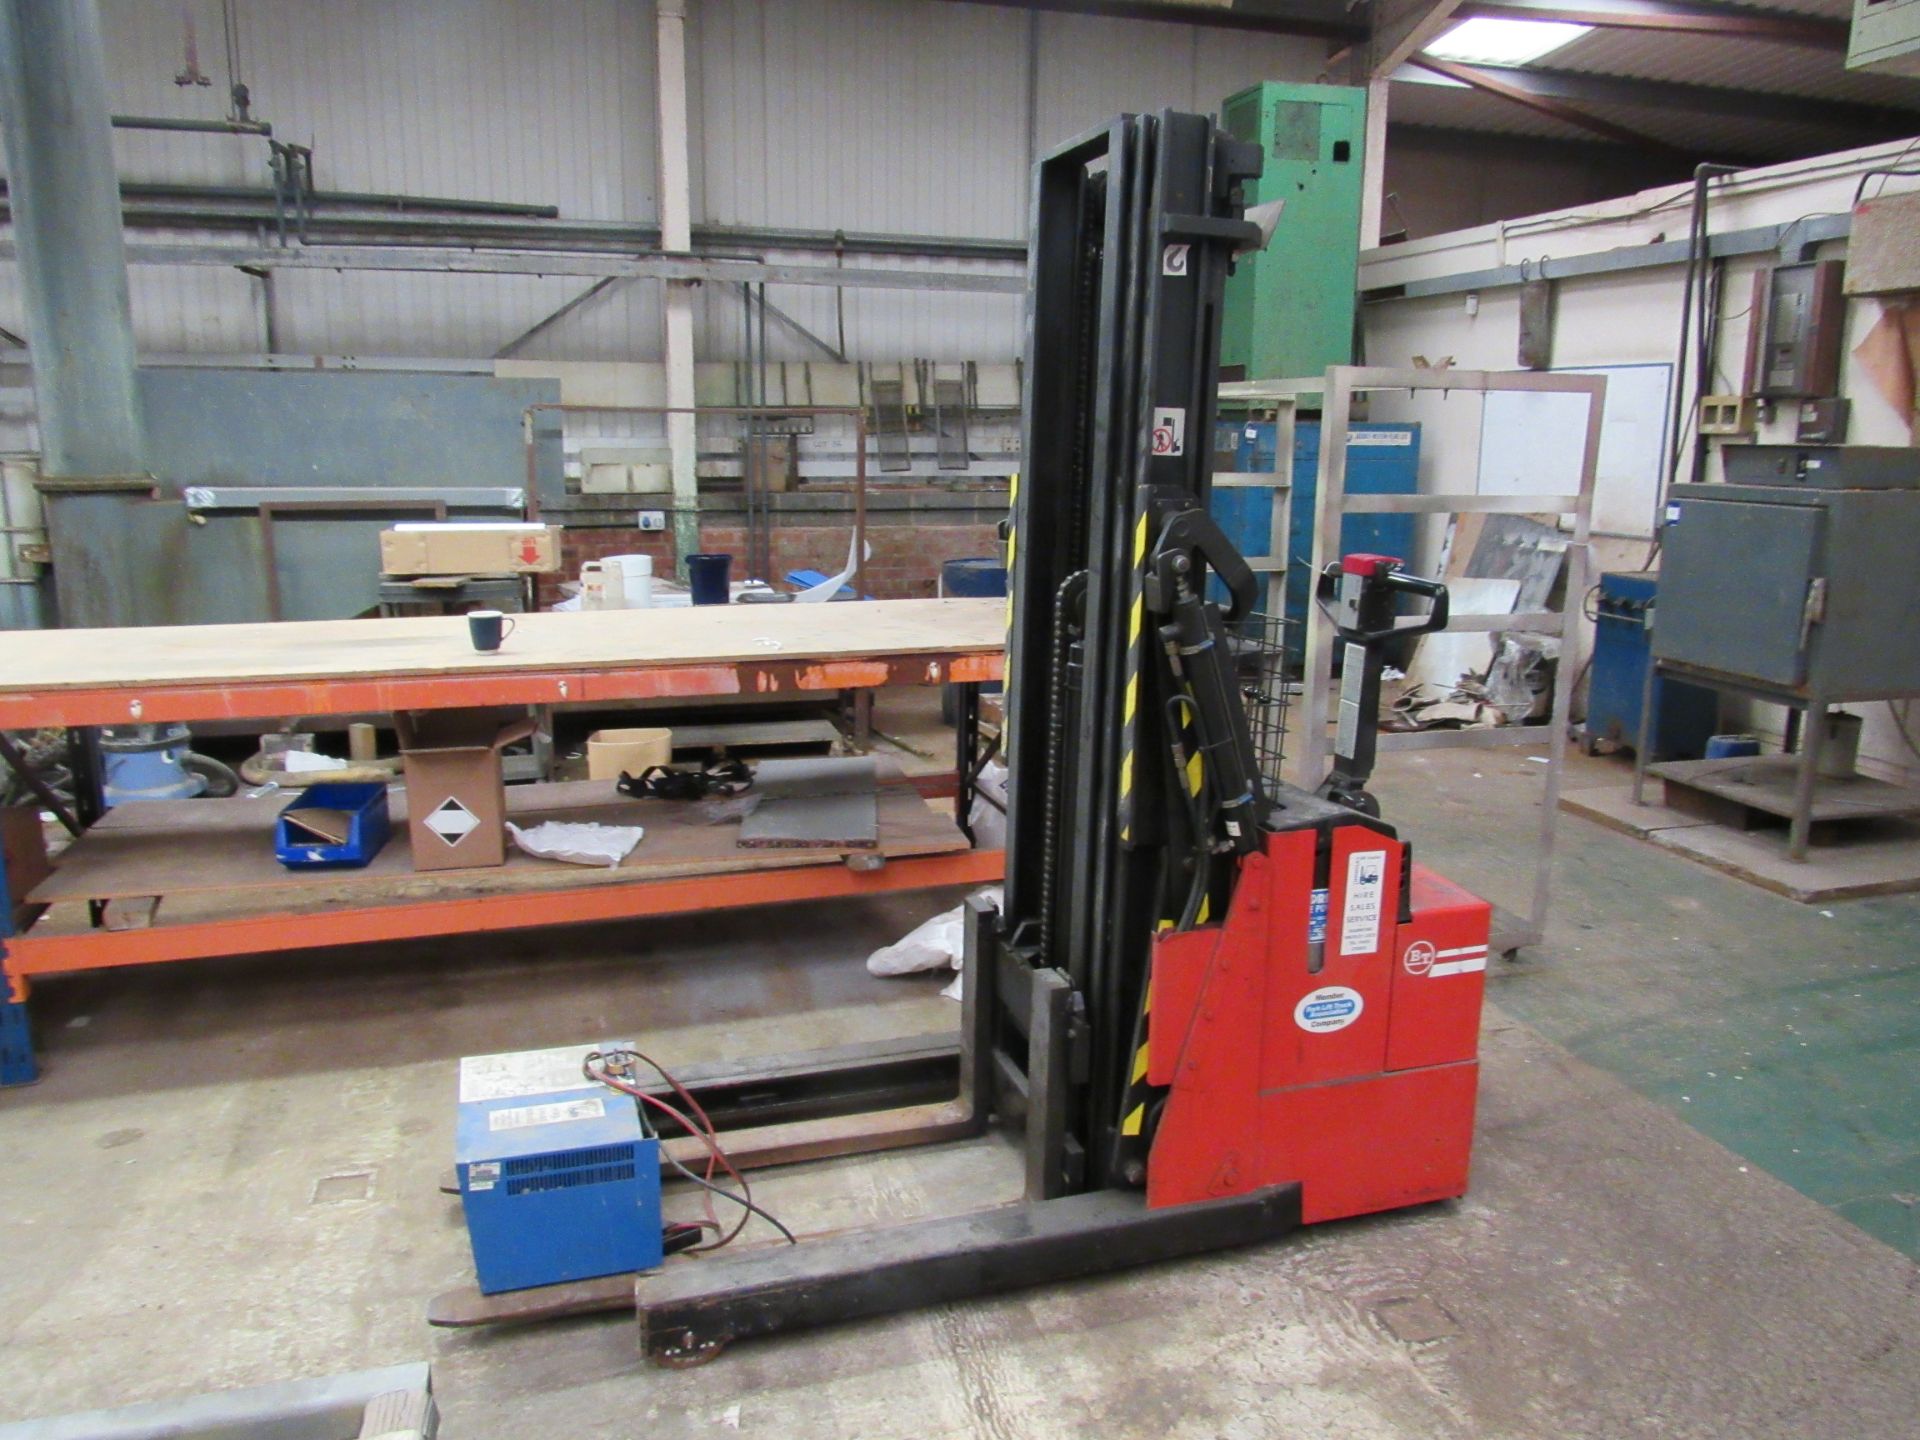 BT LSR 1200/2 1200Kg Electric 3 Axis Stacker Truck with Charger - Located on the first floor. The - Image 2 of 5